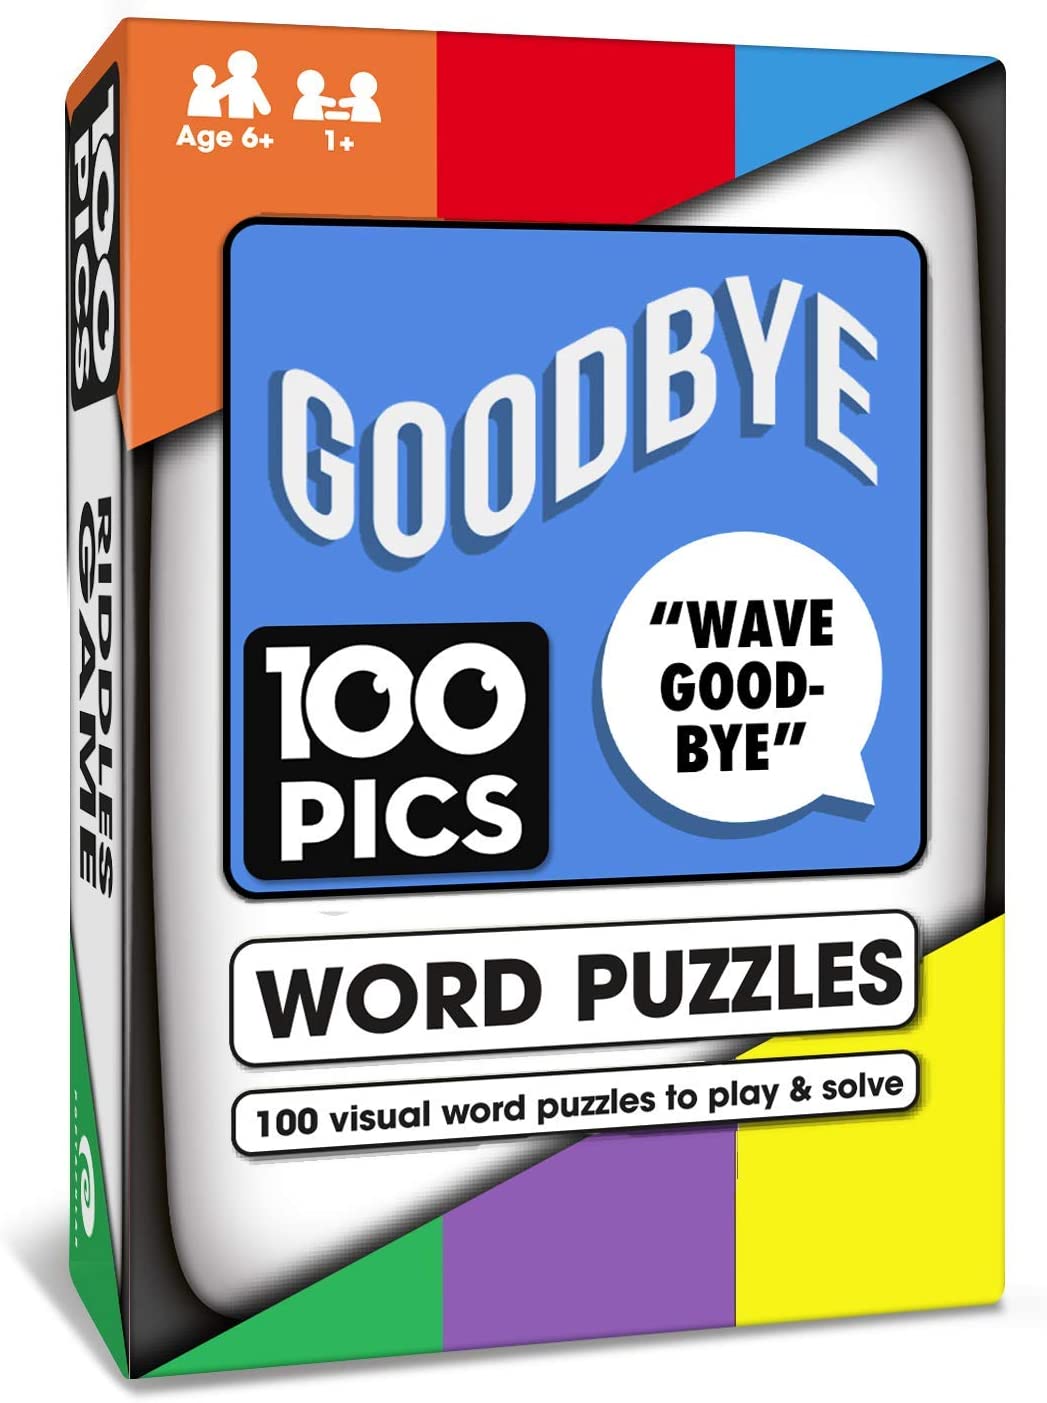 100 PICS Rebus Word Puzzles - Family Flash Card Games, Pocket Puzzles For Kids And Adults